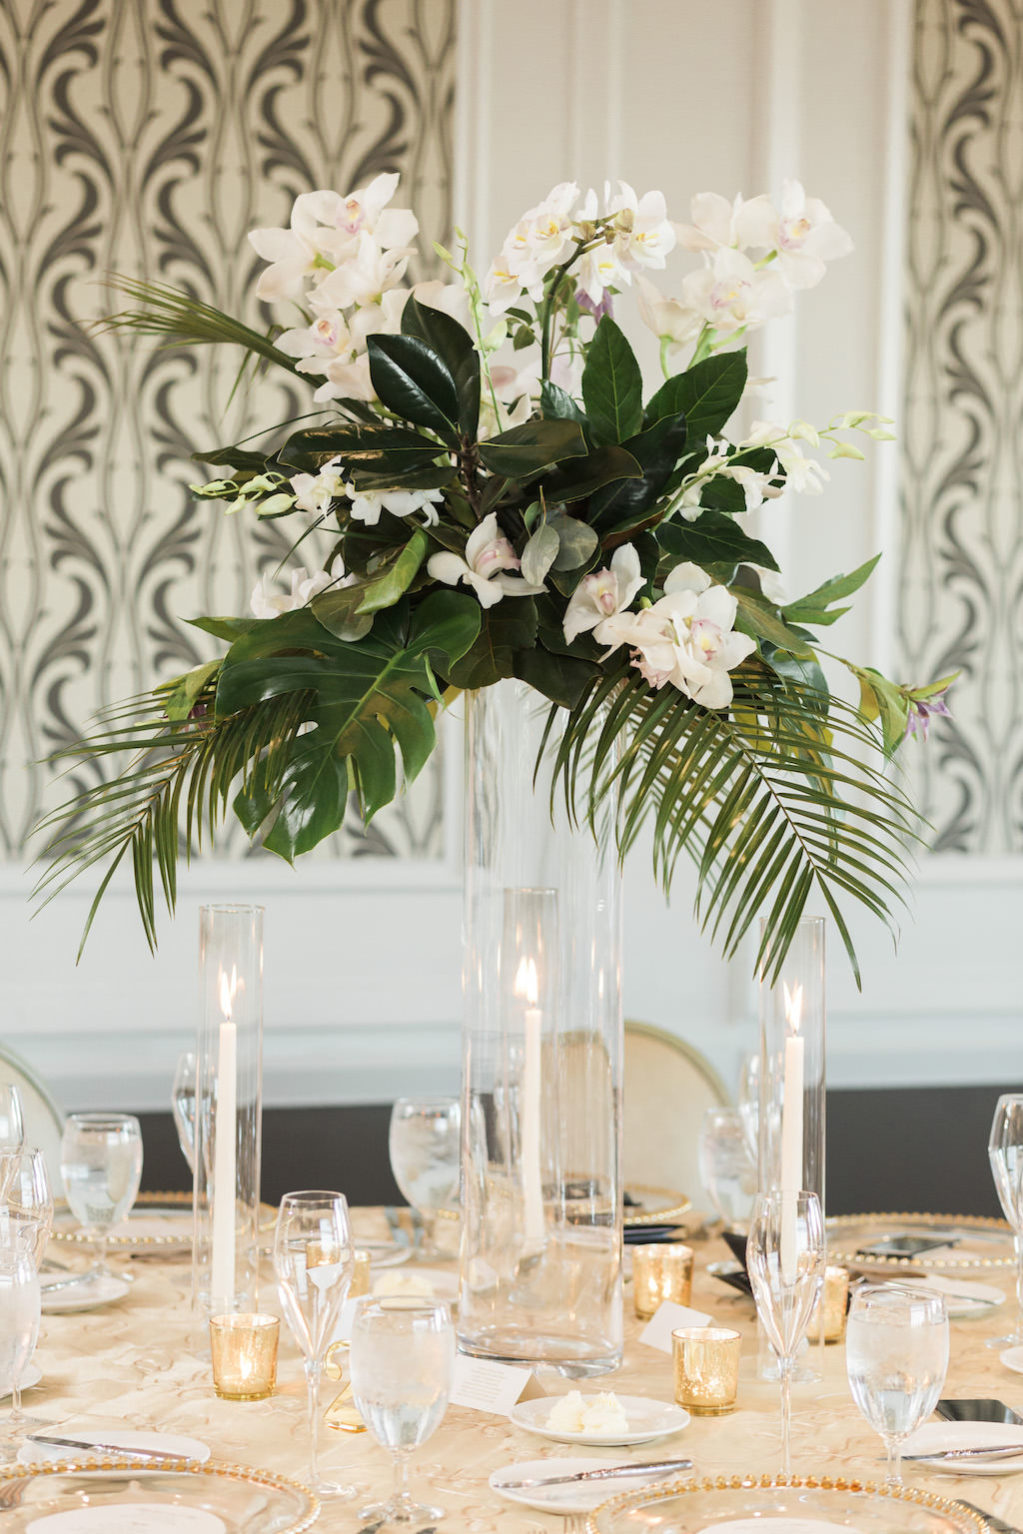 Classic, Tropical Inspired Wedding Reception Decor, Tall Glass Cylinder Vase with Palm Tree Branches, White Orchids and Green Leaves Floral Centerpiece, Round Table with Gold Tablecloth, Tall Candlesticks in Clear Cylinder Vases